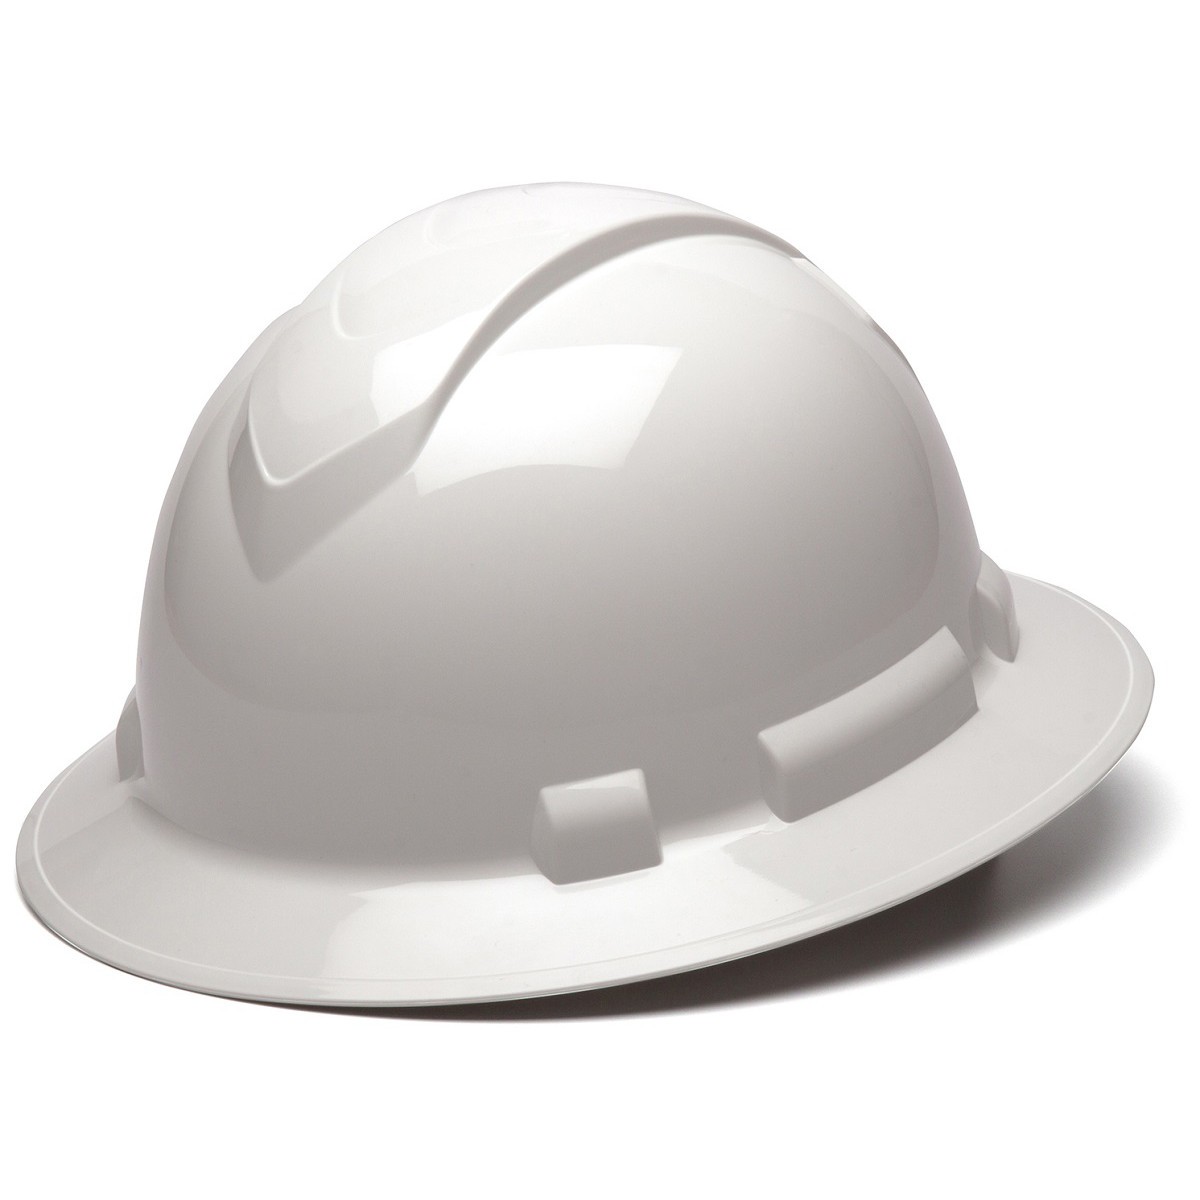 Pyramex Ridgeline Full Brim Hard Hat with 6 Point Ratchet Suspension from Columbia Safety